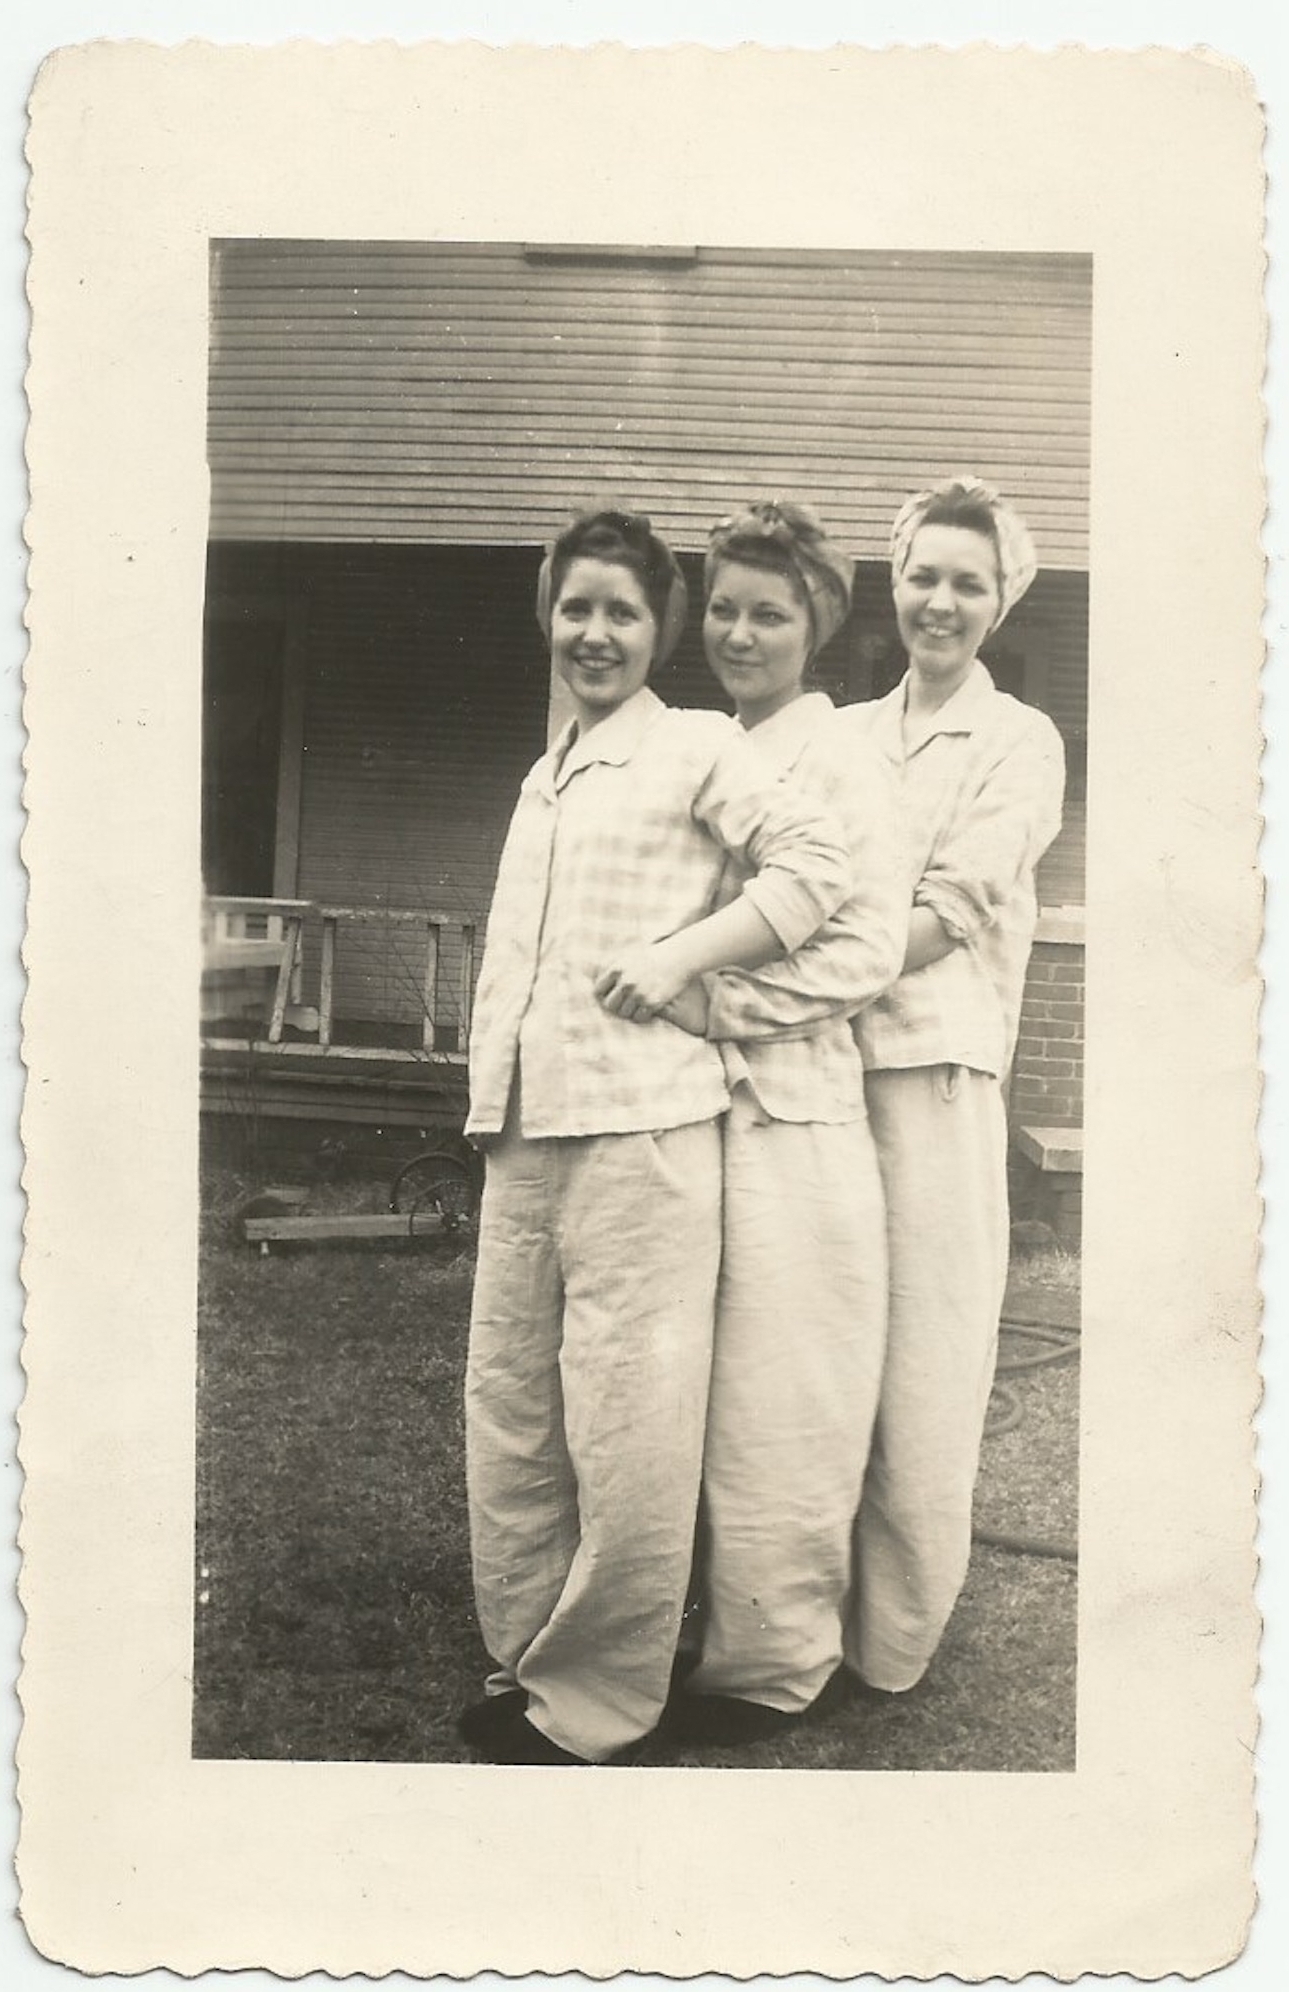 Edith, Myrtle, and Nancy 'Libby' Bryant